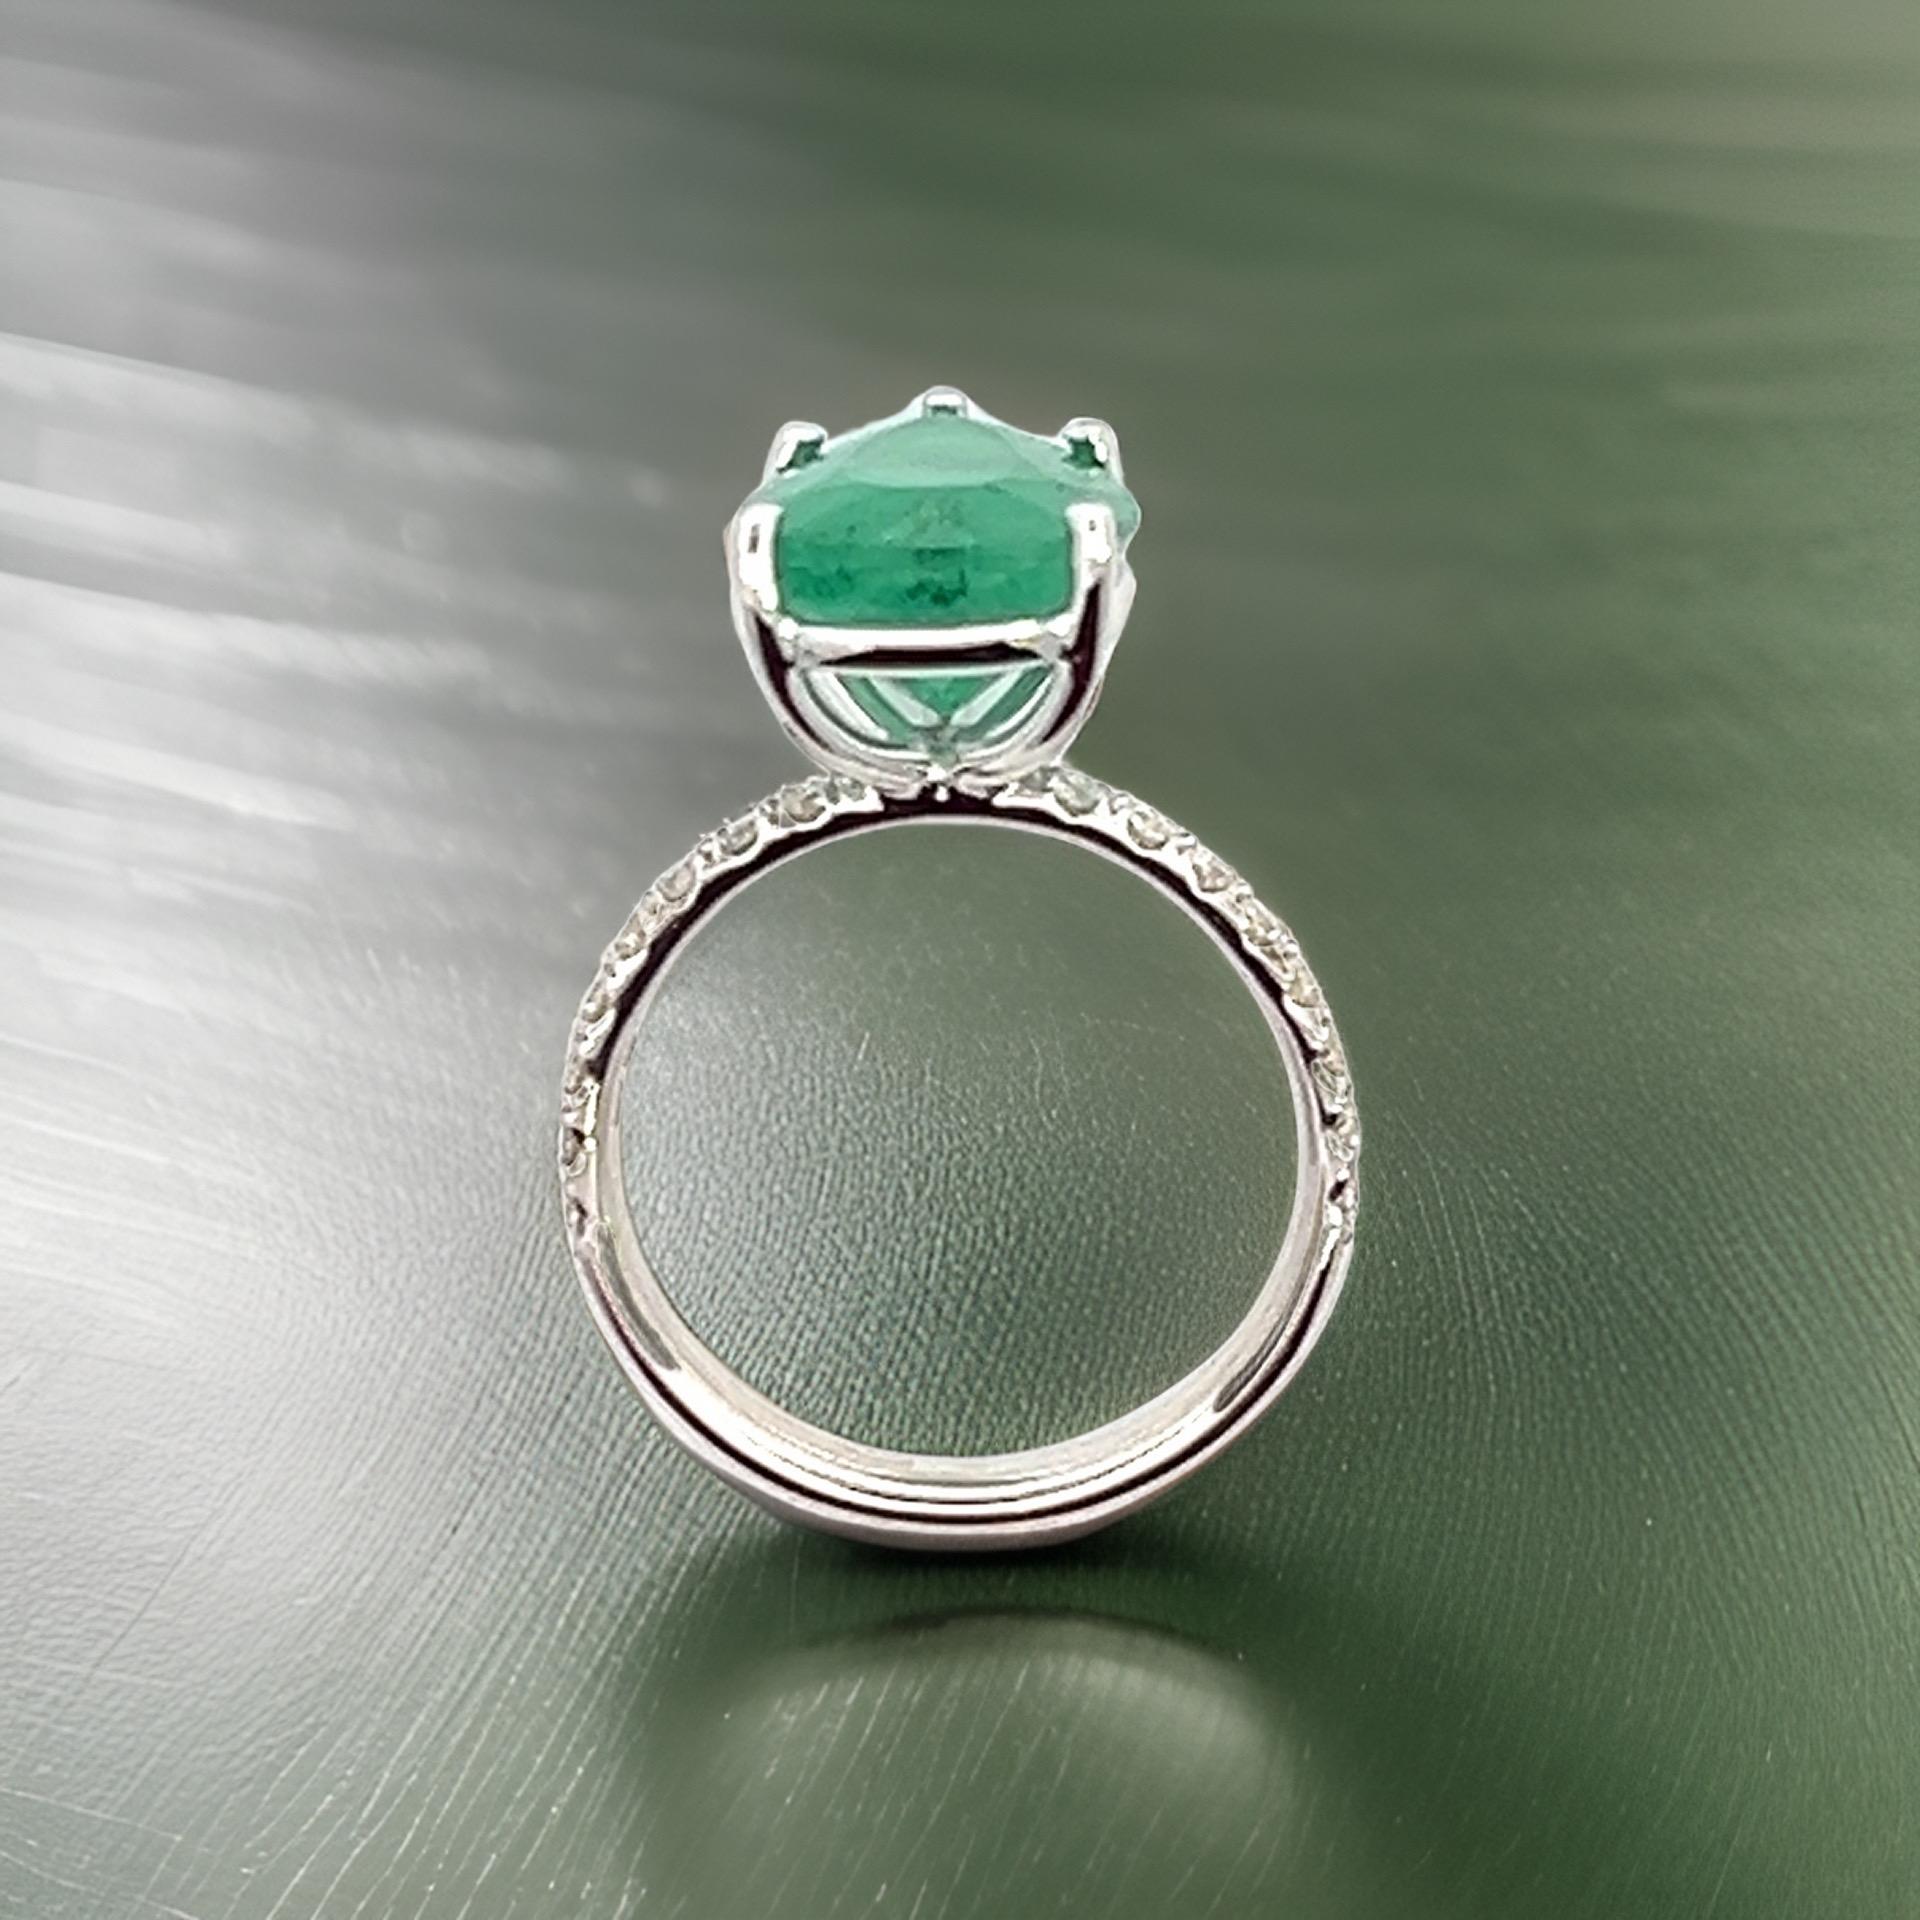 Natural Emerald Diamond Ring 6.5 14k WG 4.62 TCW Certified For Sale 11